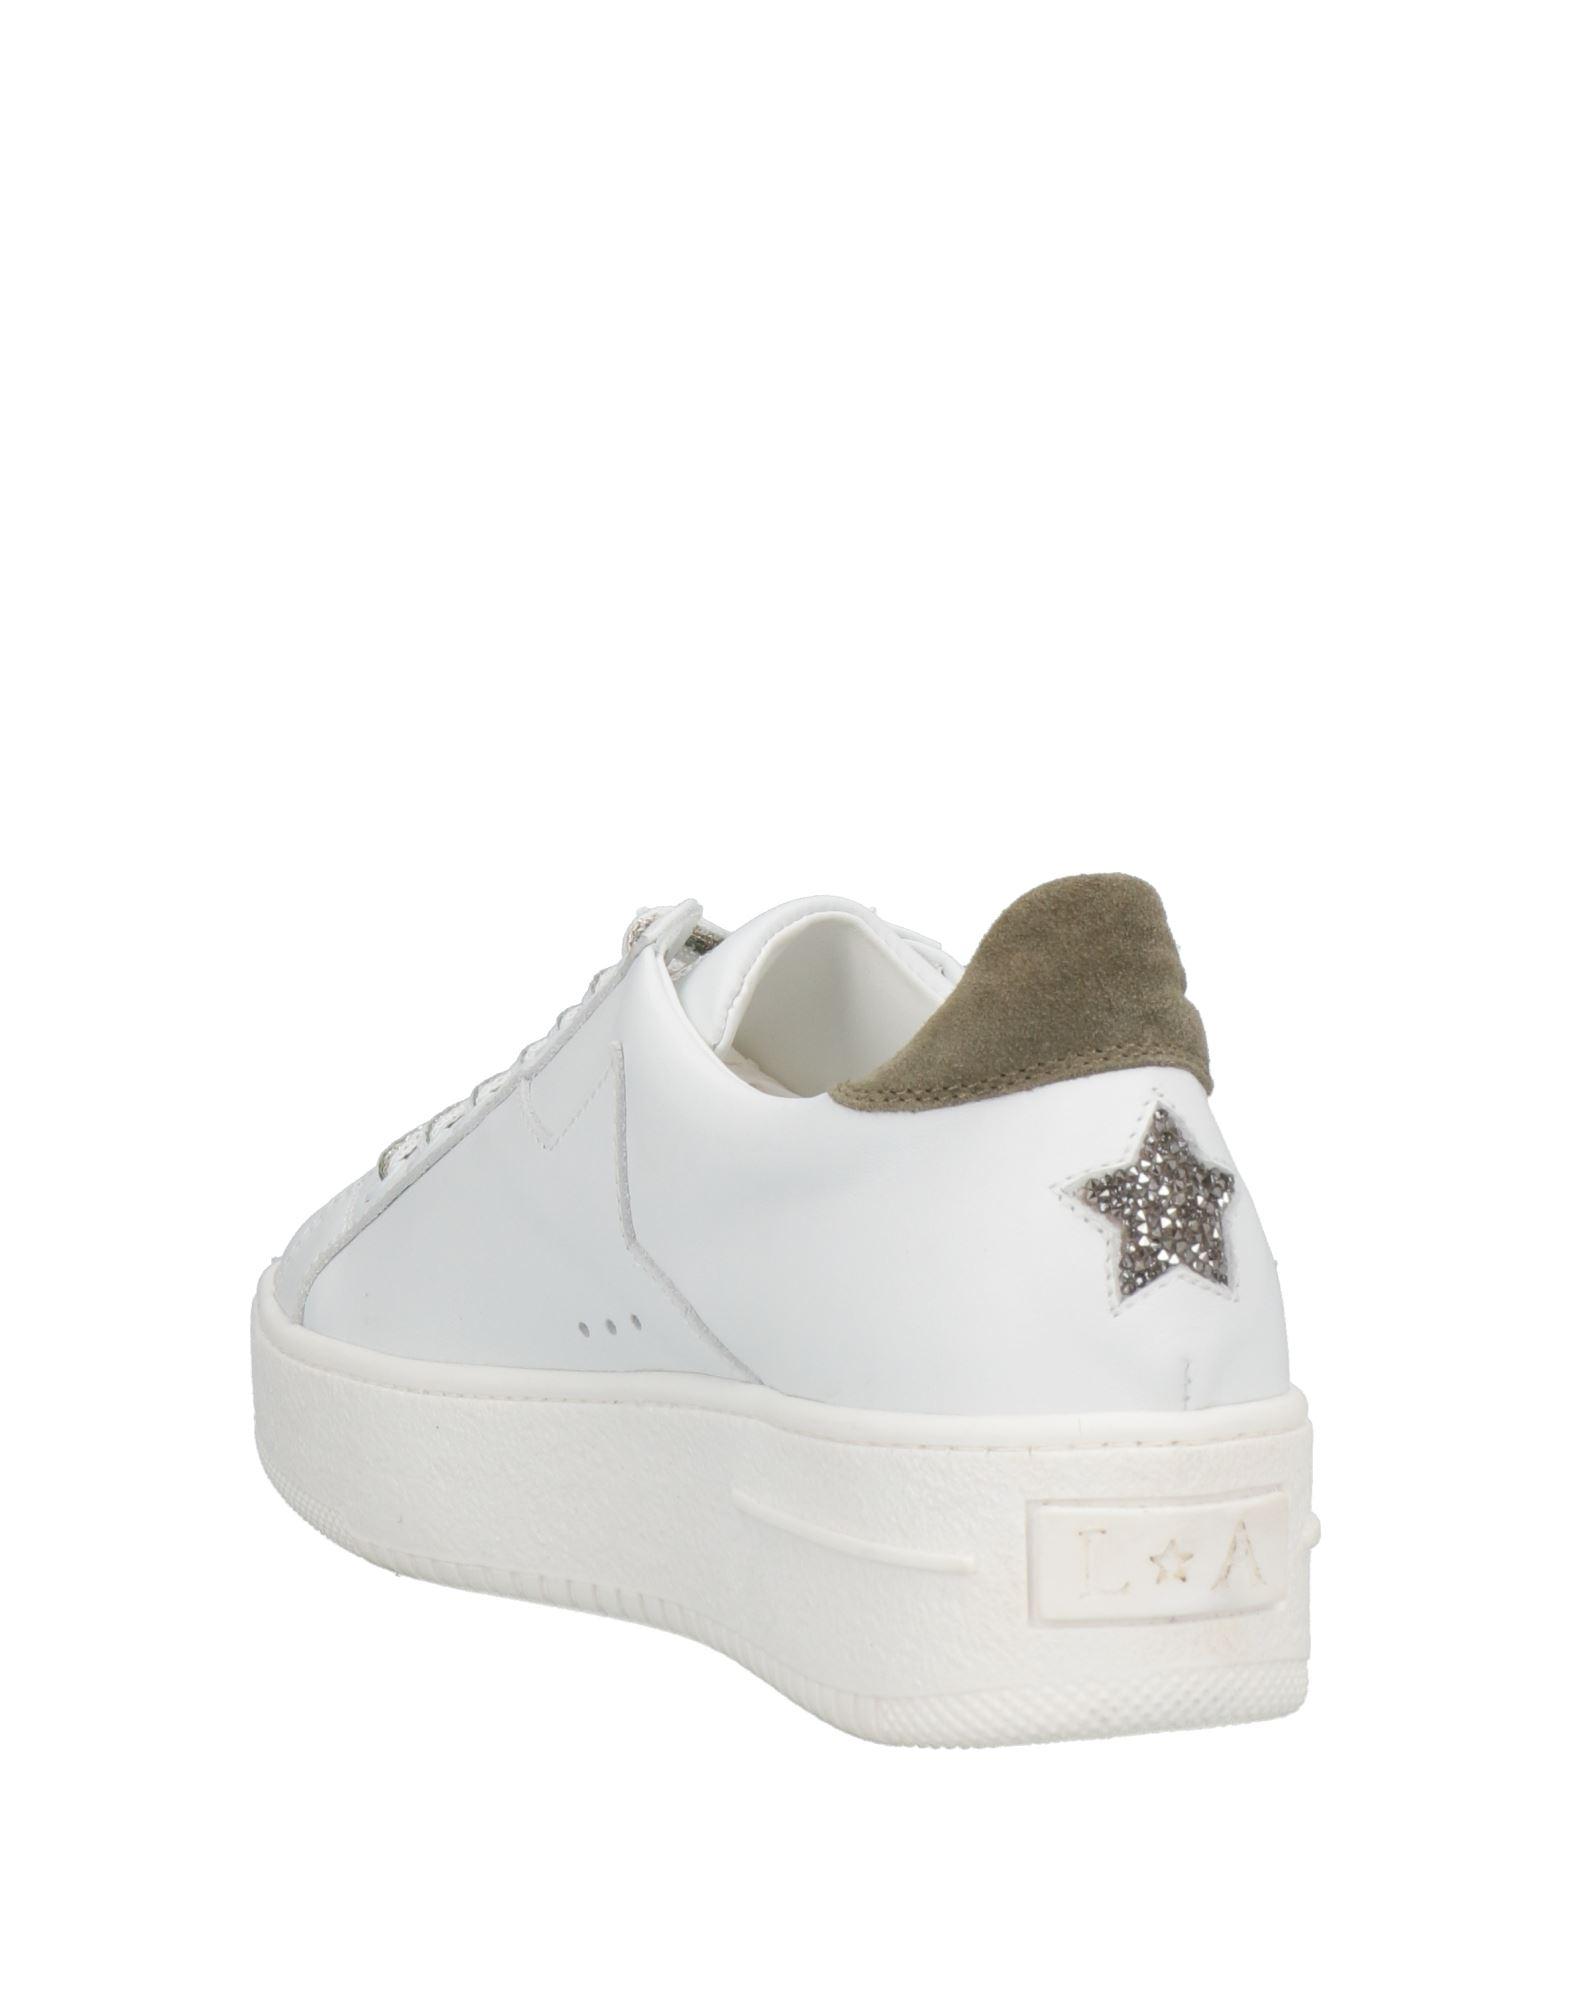 Lorena Antoniazzi Trainers in White | Lyst